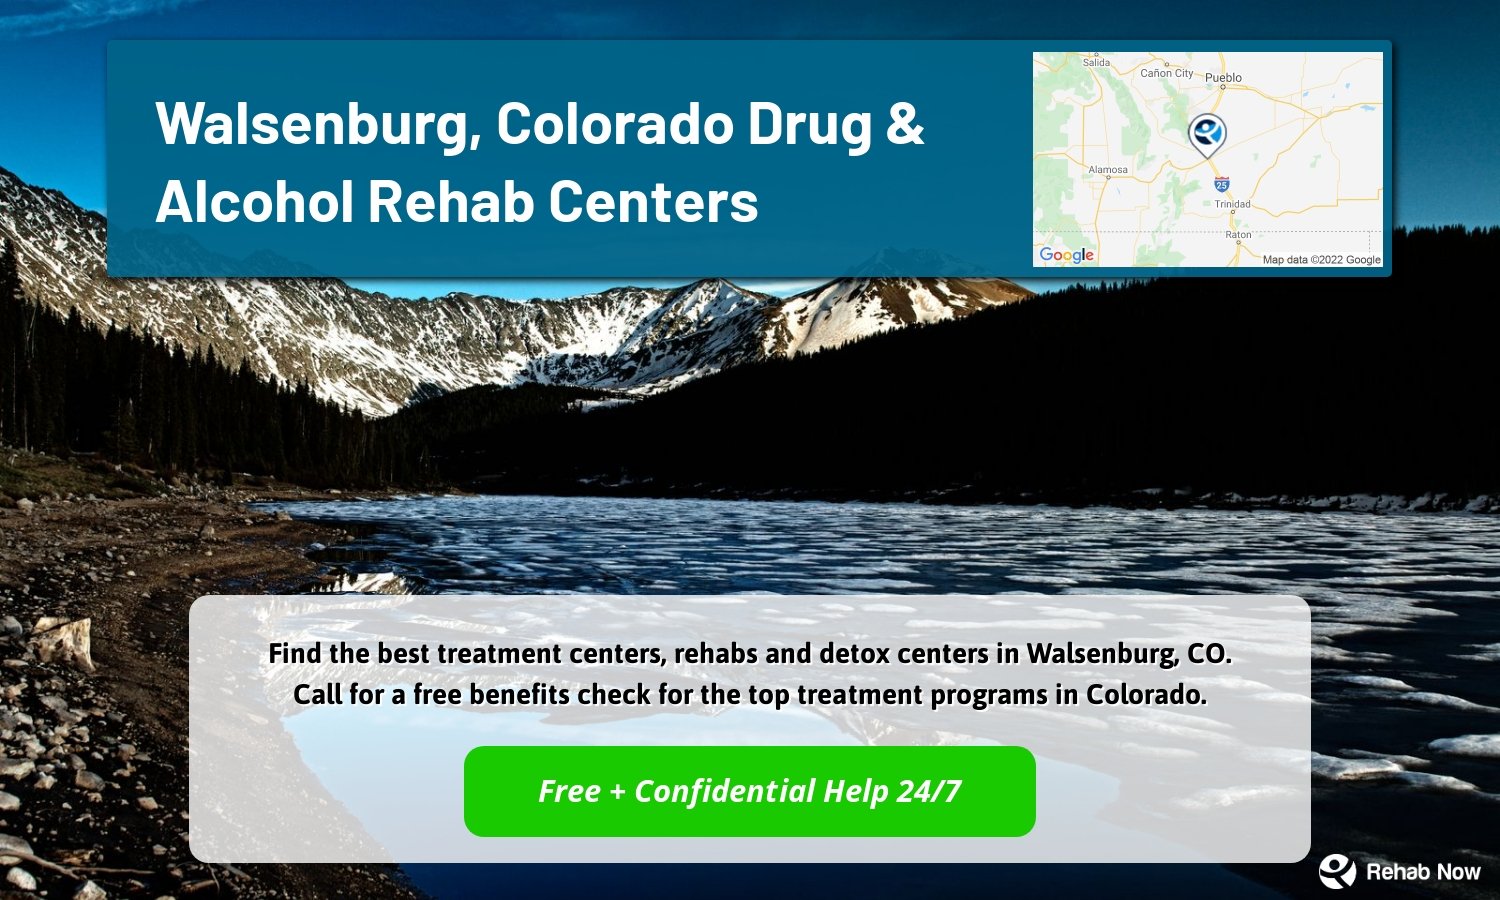 Find the best treatment centers, rehabs and detox centers in Walsenburg, CO. Call for a free benefits check for the top treatment programs in Colorado.